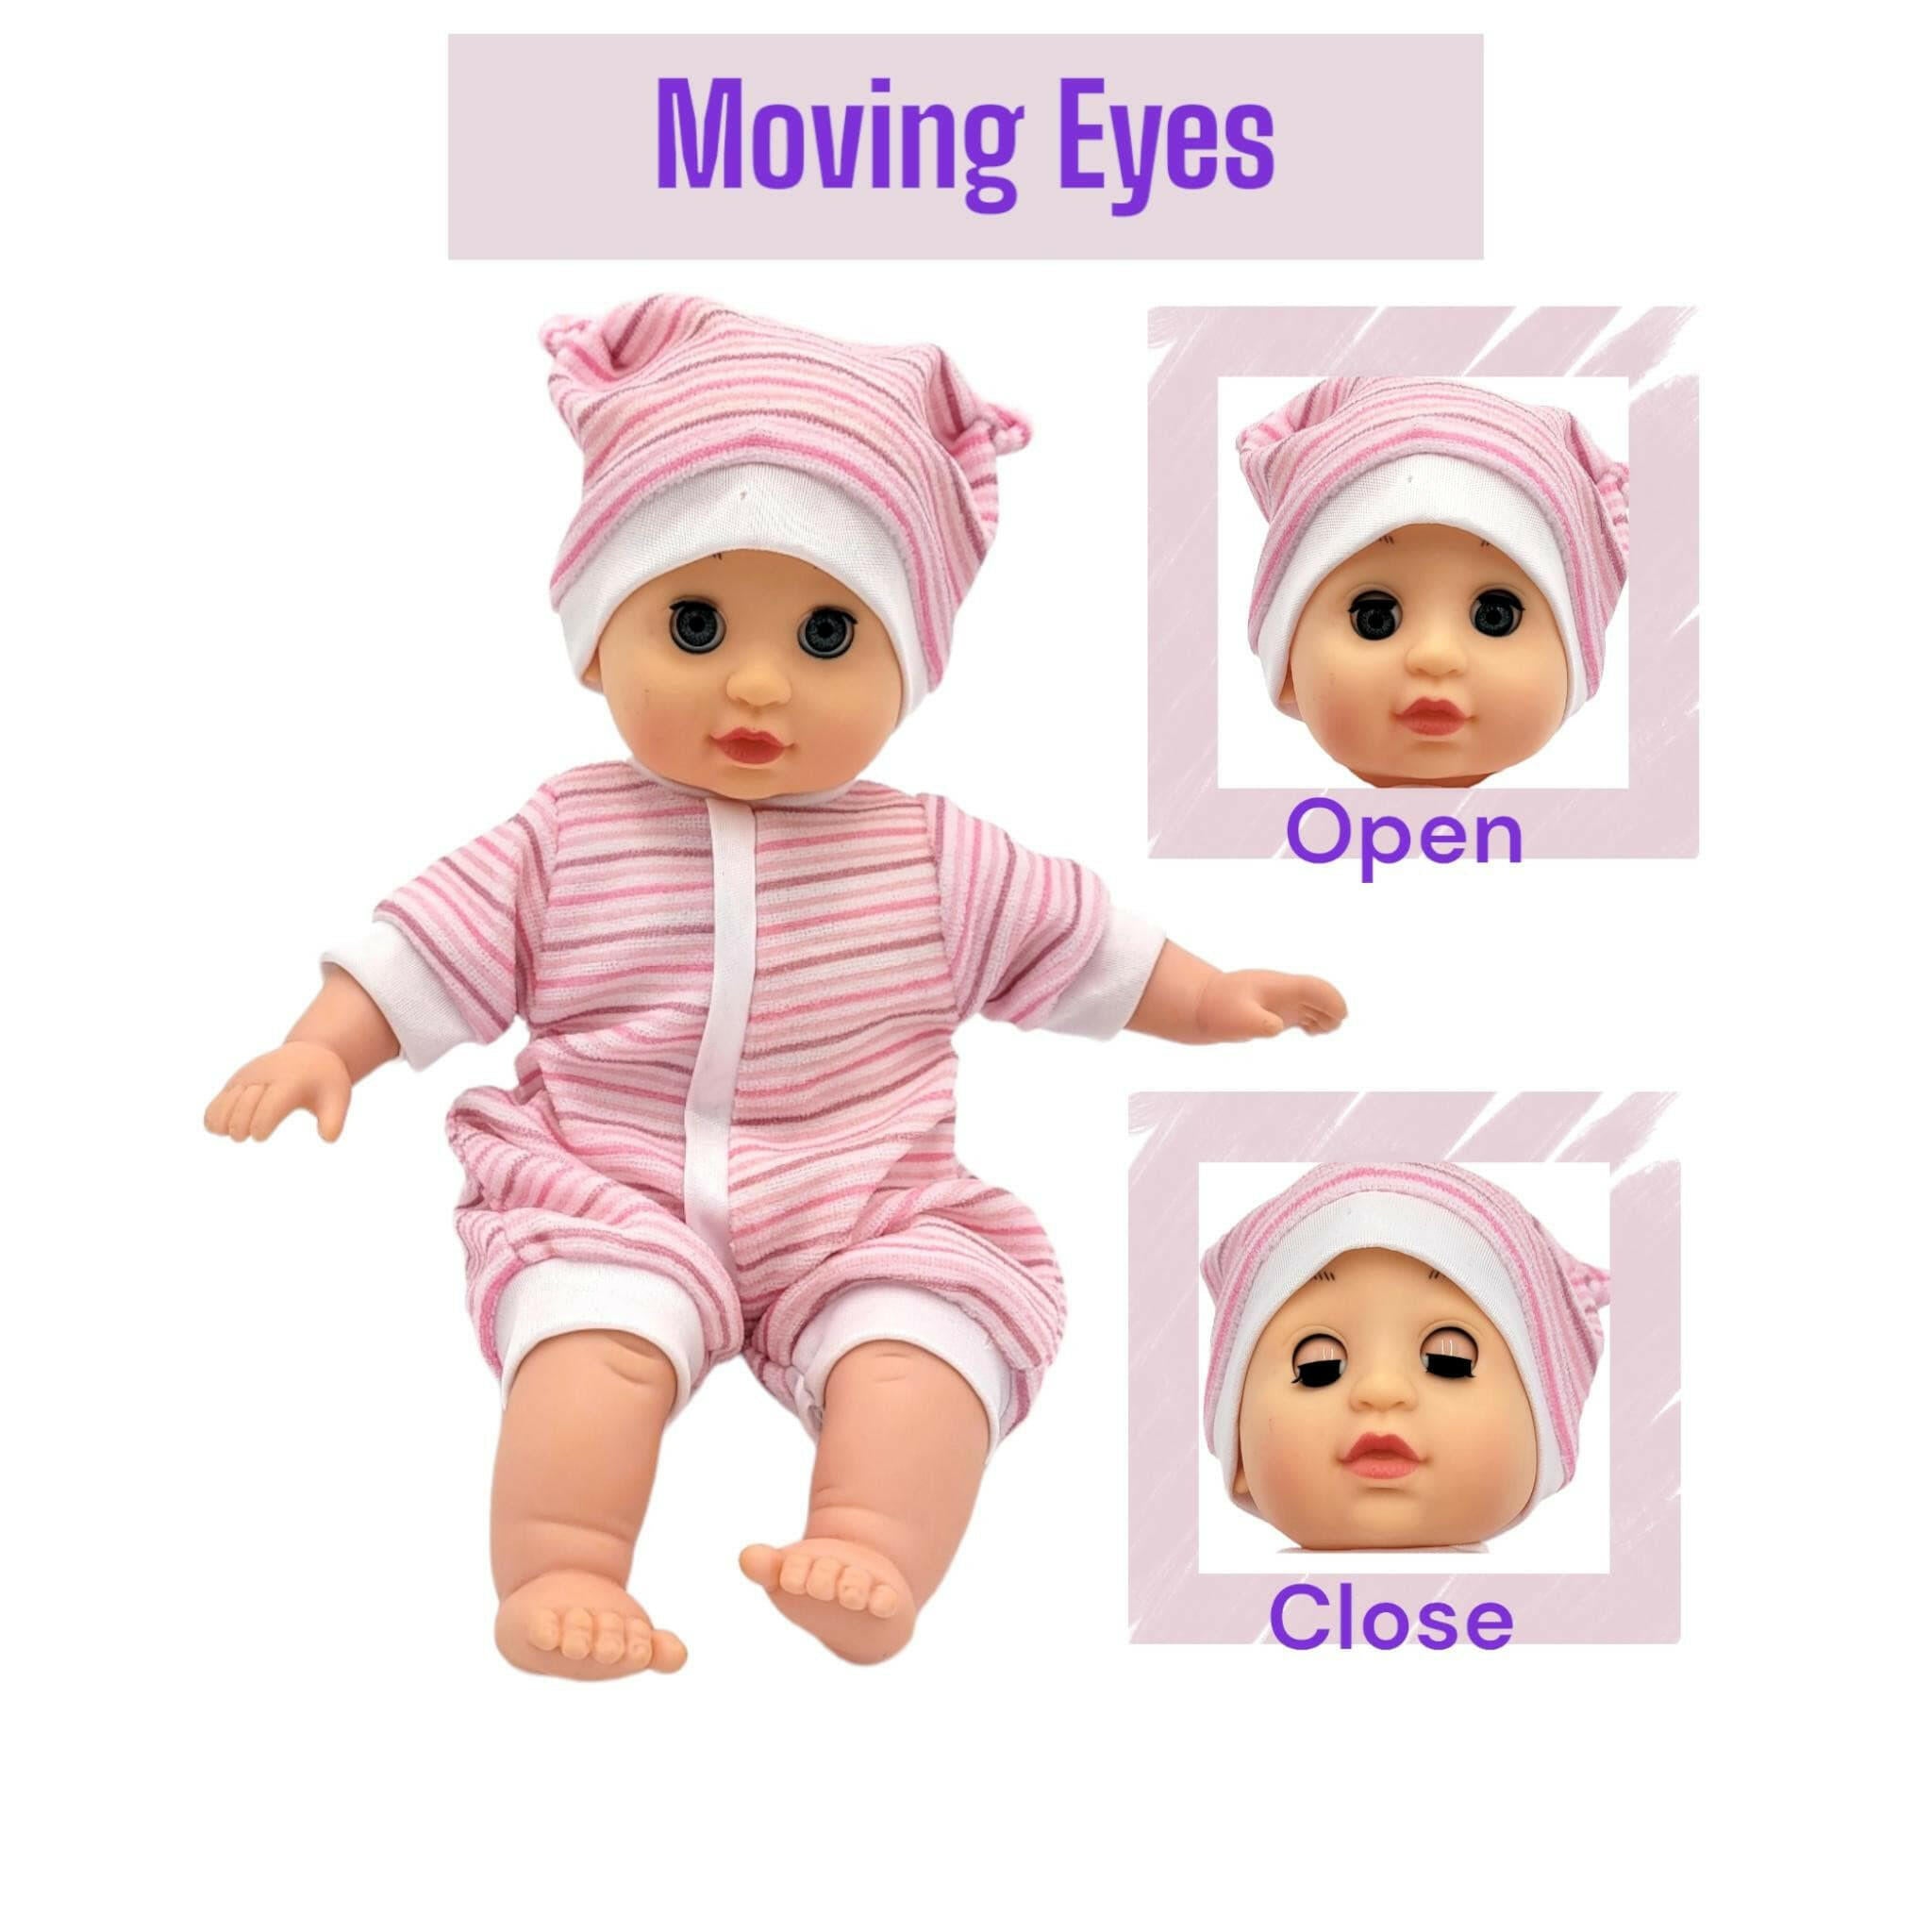 14 Inch Soft Baby Doll Can Speak 12 Baby Sounds With Doctor Set